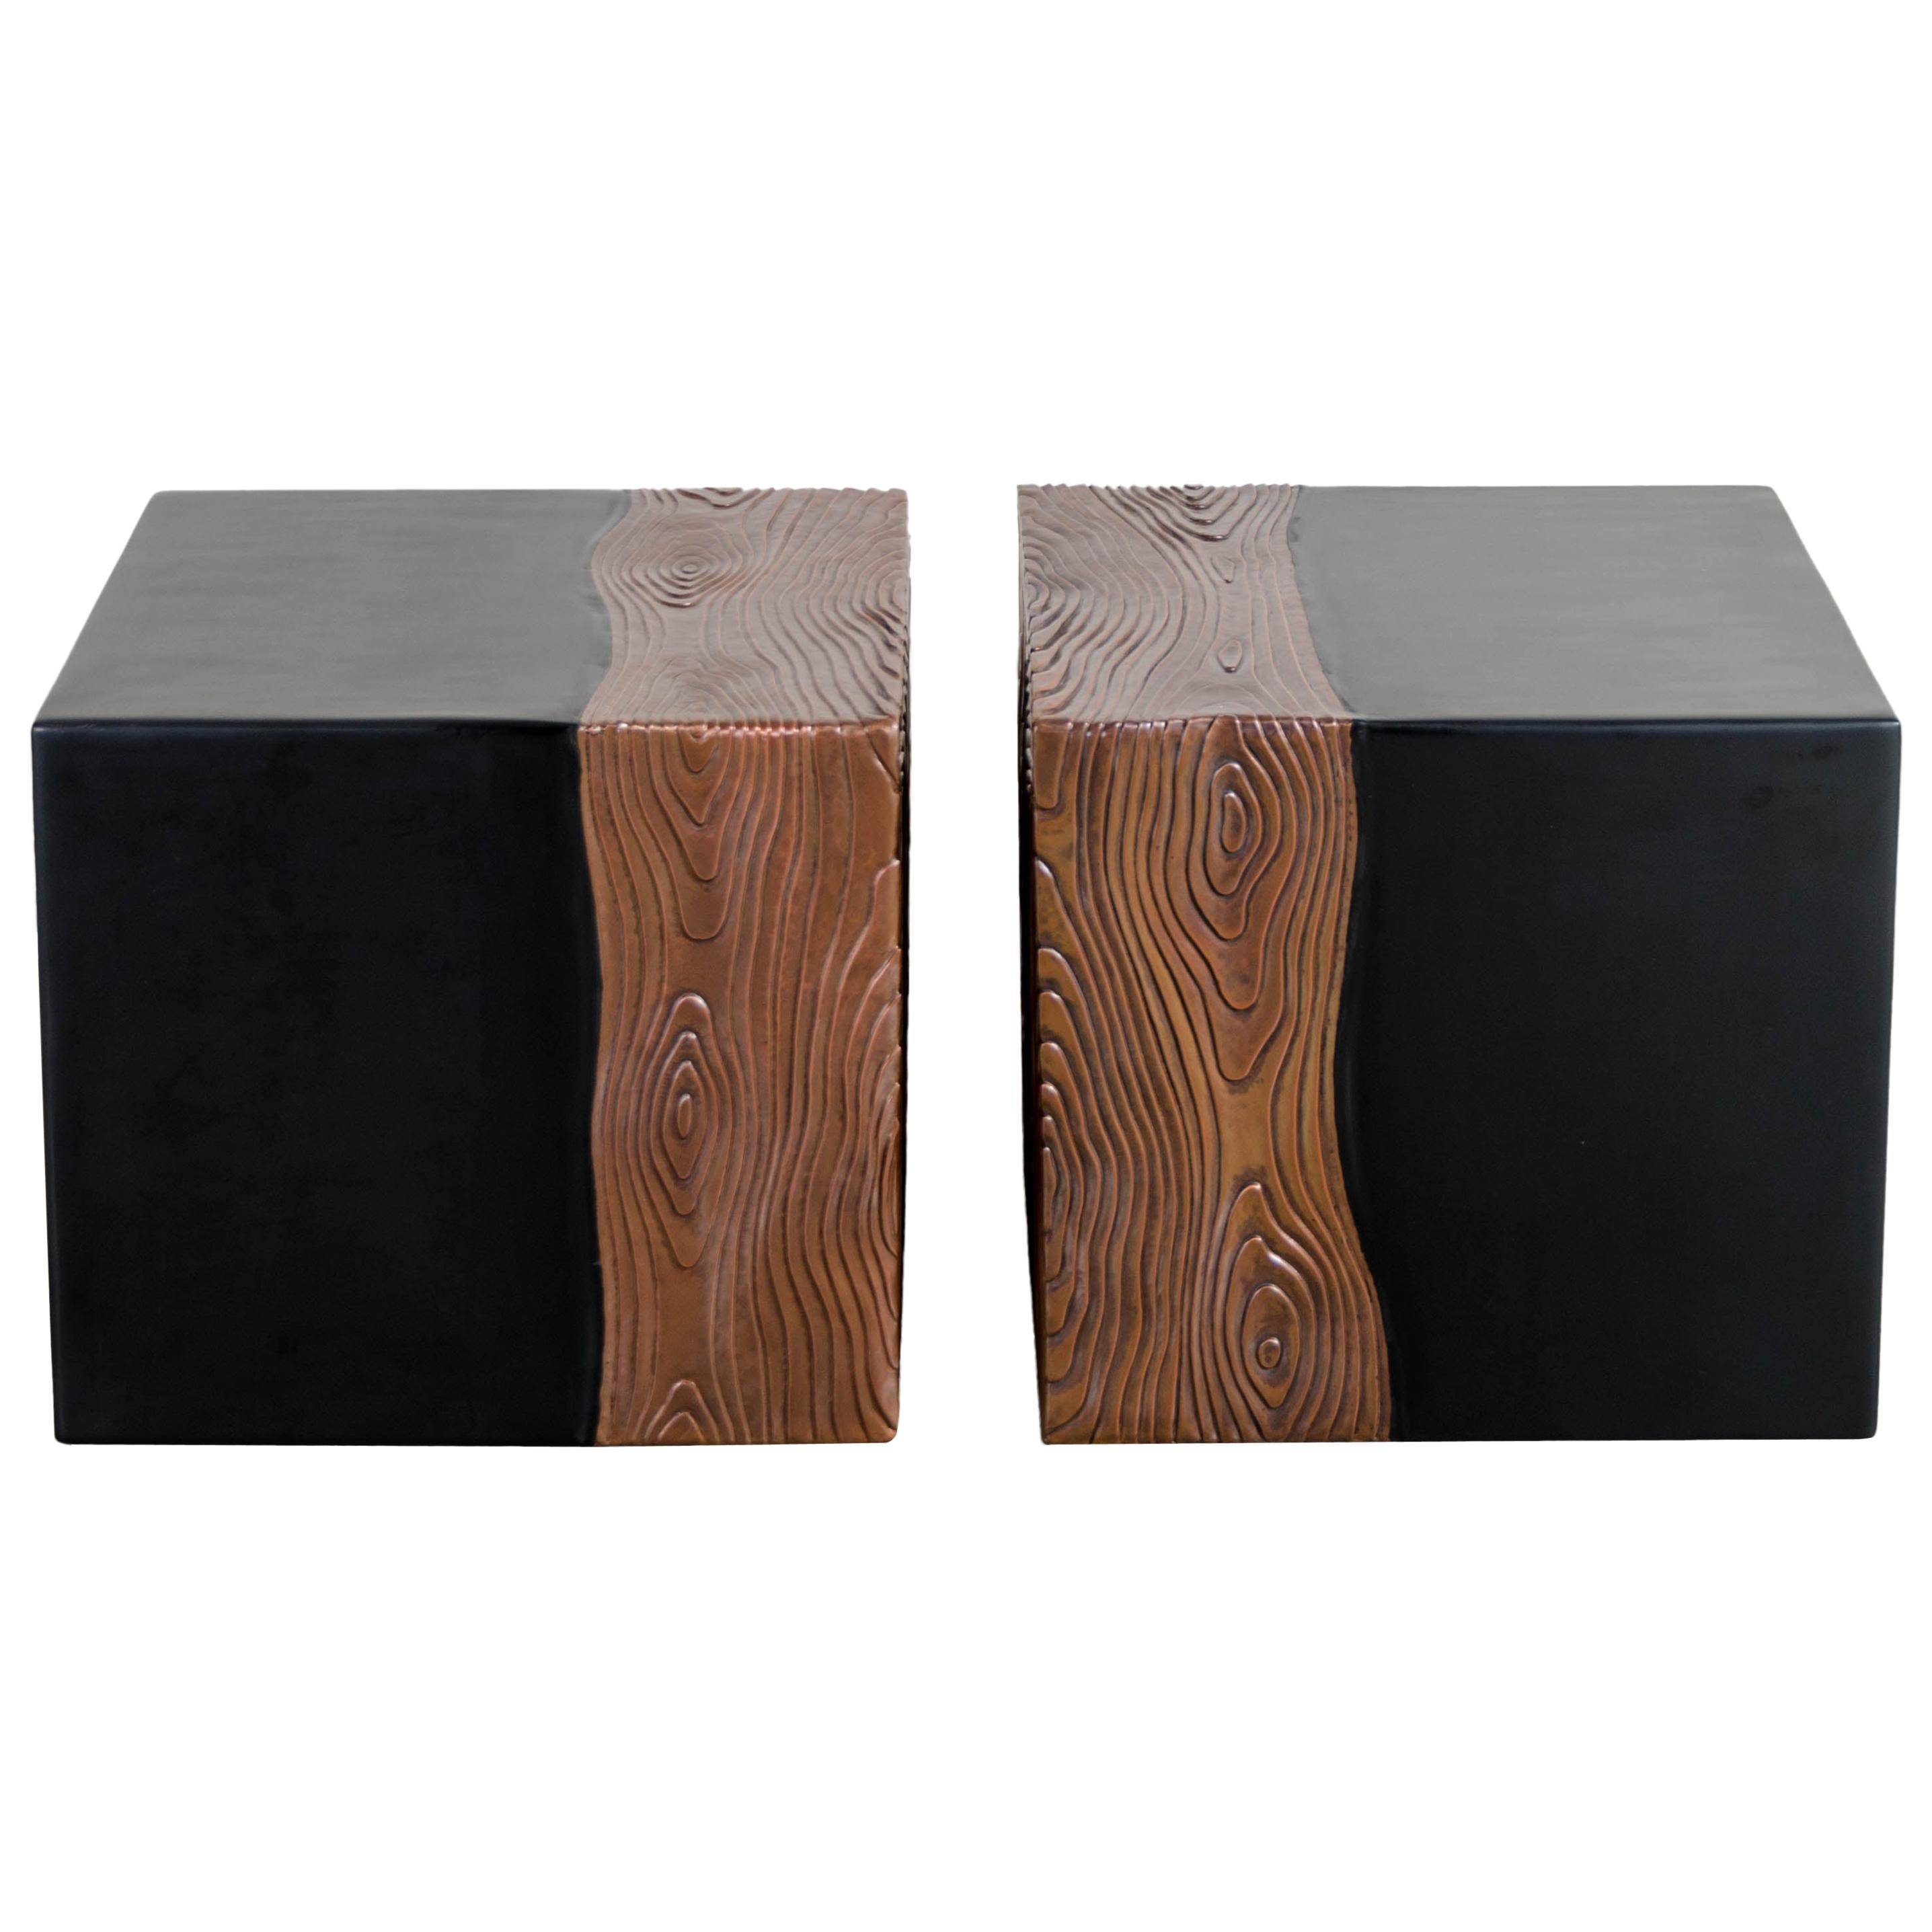 Square Seat with Woodgrain Design, Black Lacquer, Copper, Set of 2 by Robert Kuo For Sale